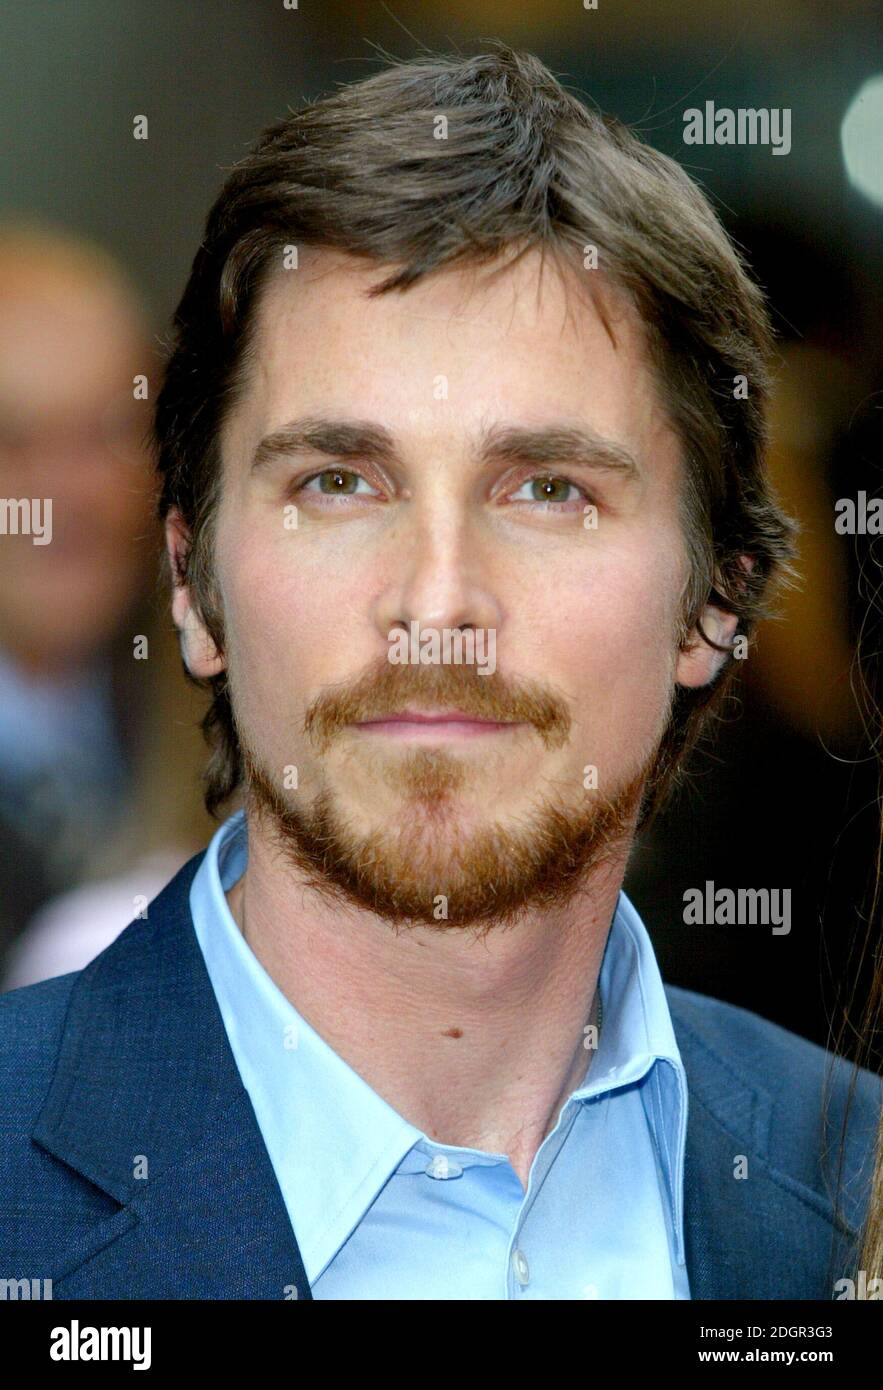 Christian Bale at the European premiere of Batman Begins, Leicester Square,  London. Doug Peters/ Stock Photo - Alamy